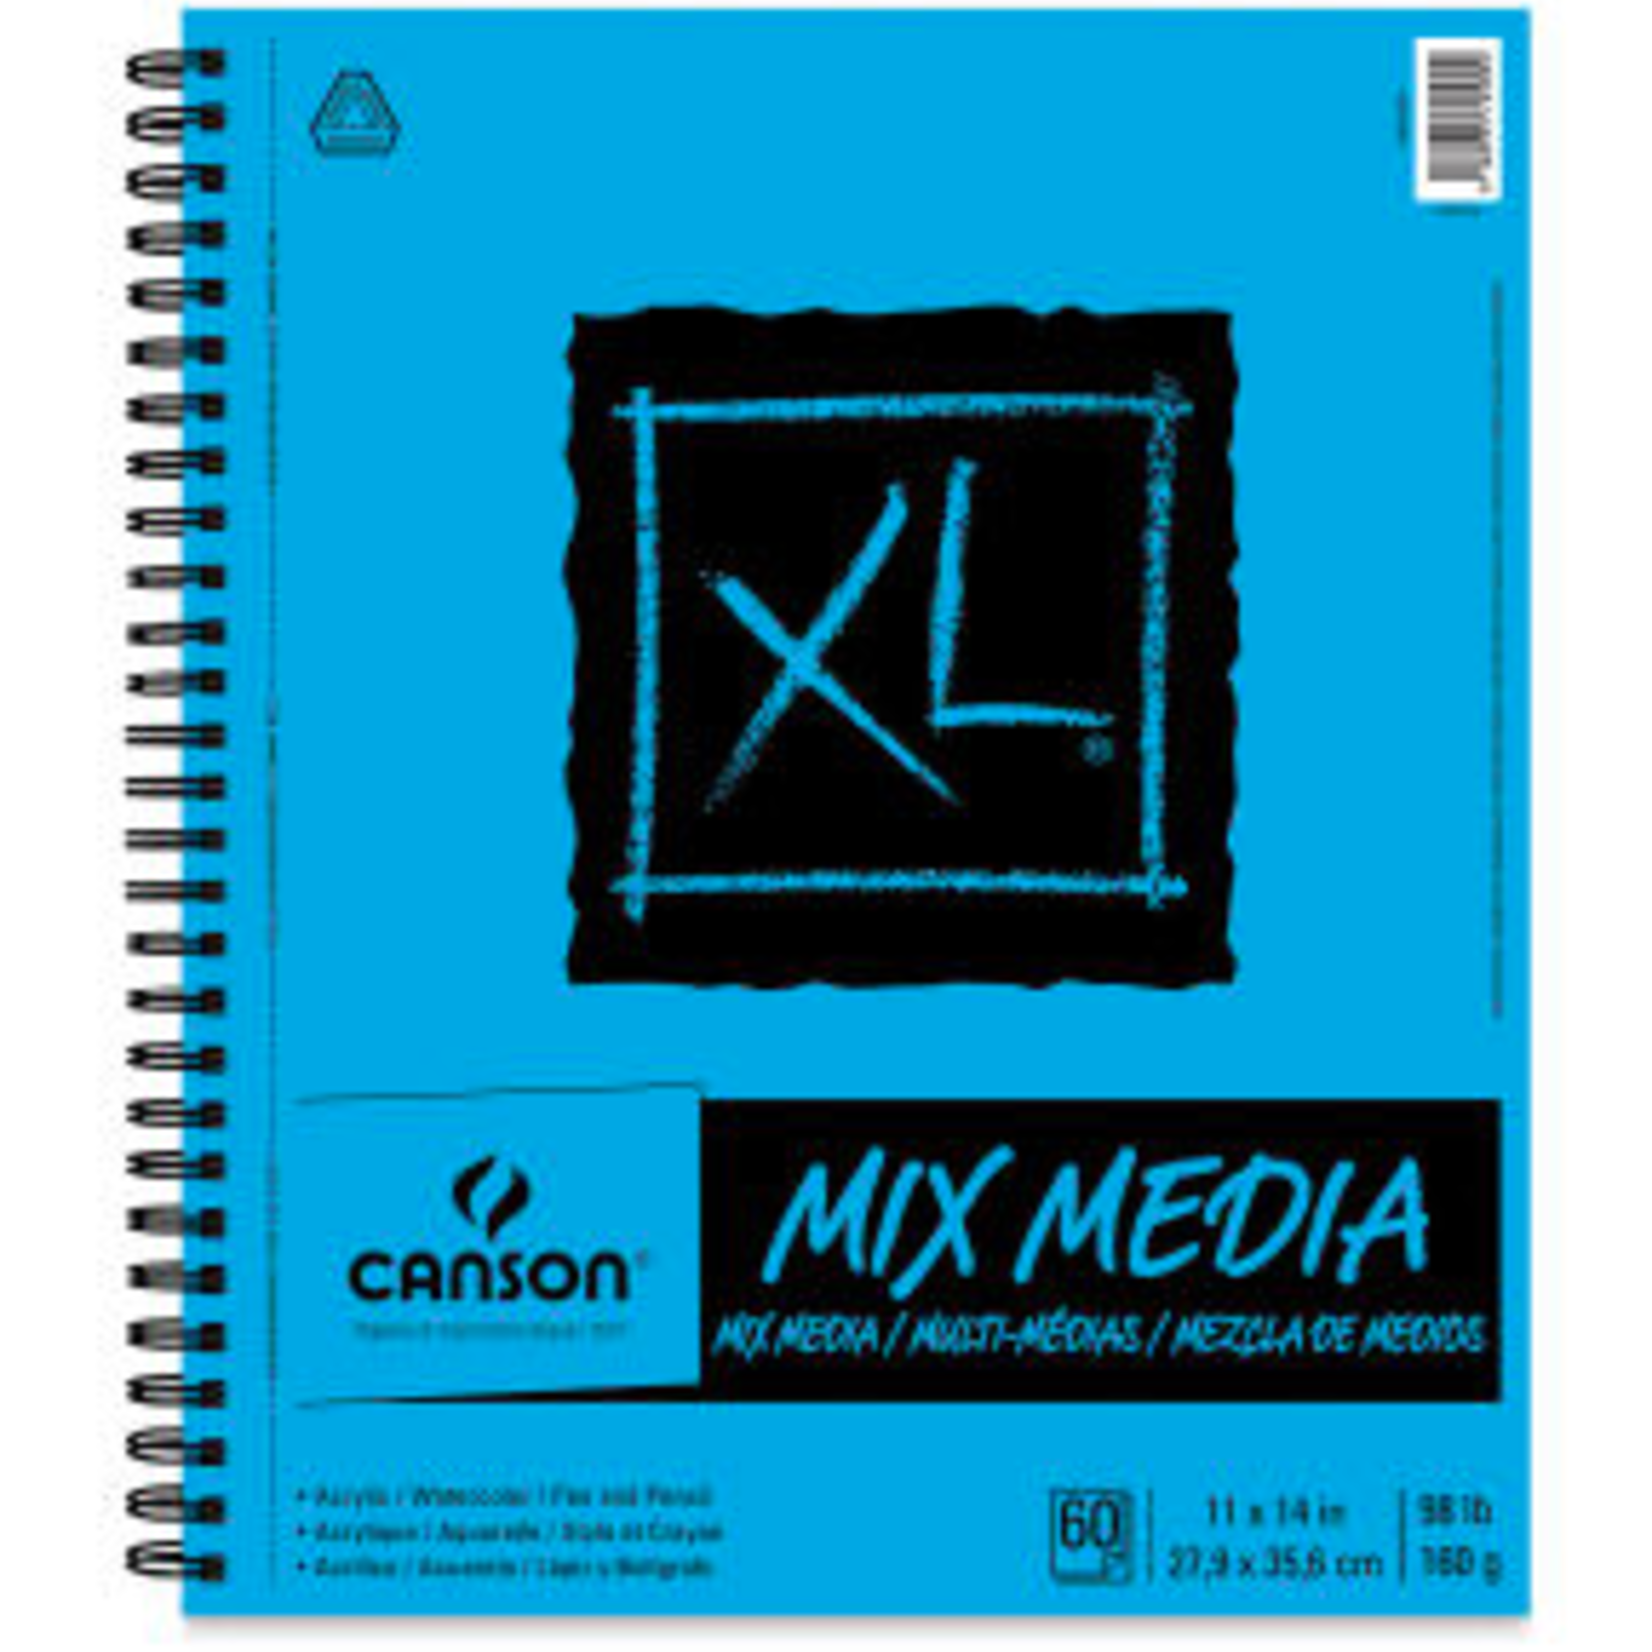 CANSON CANSON XL MIX MEDIA PAD 98LB SIDE COIL  60/SHT 11X14